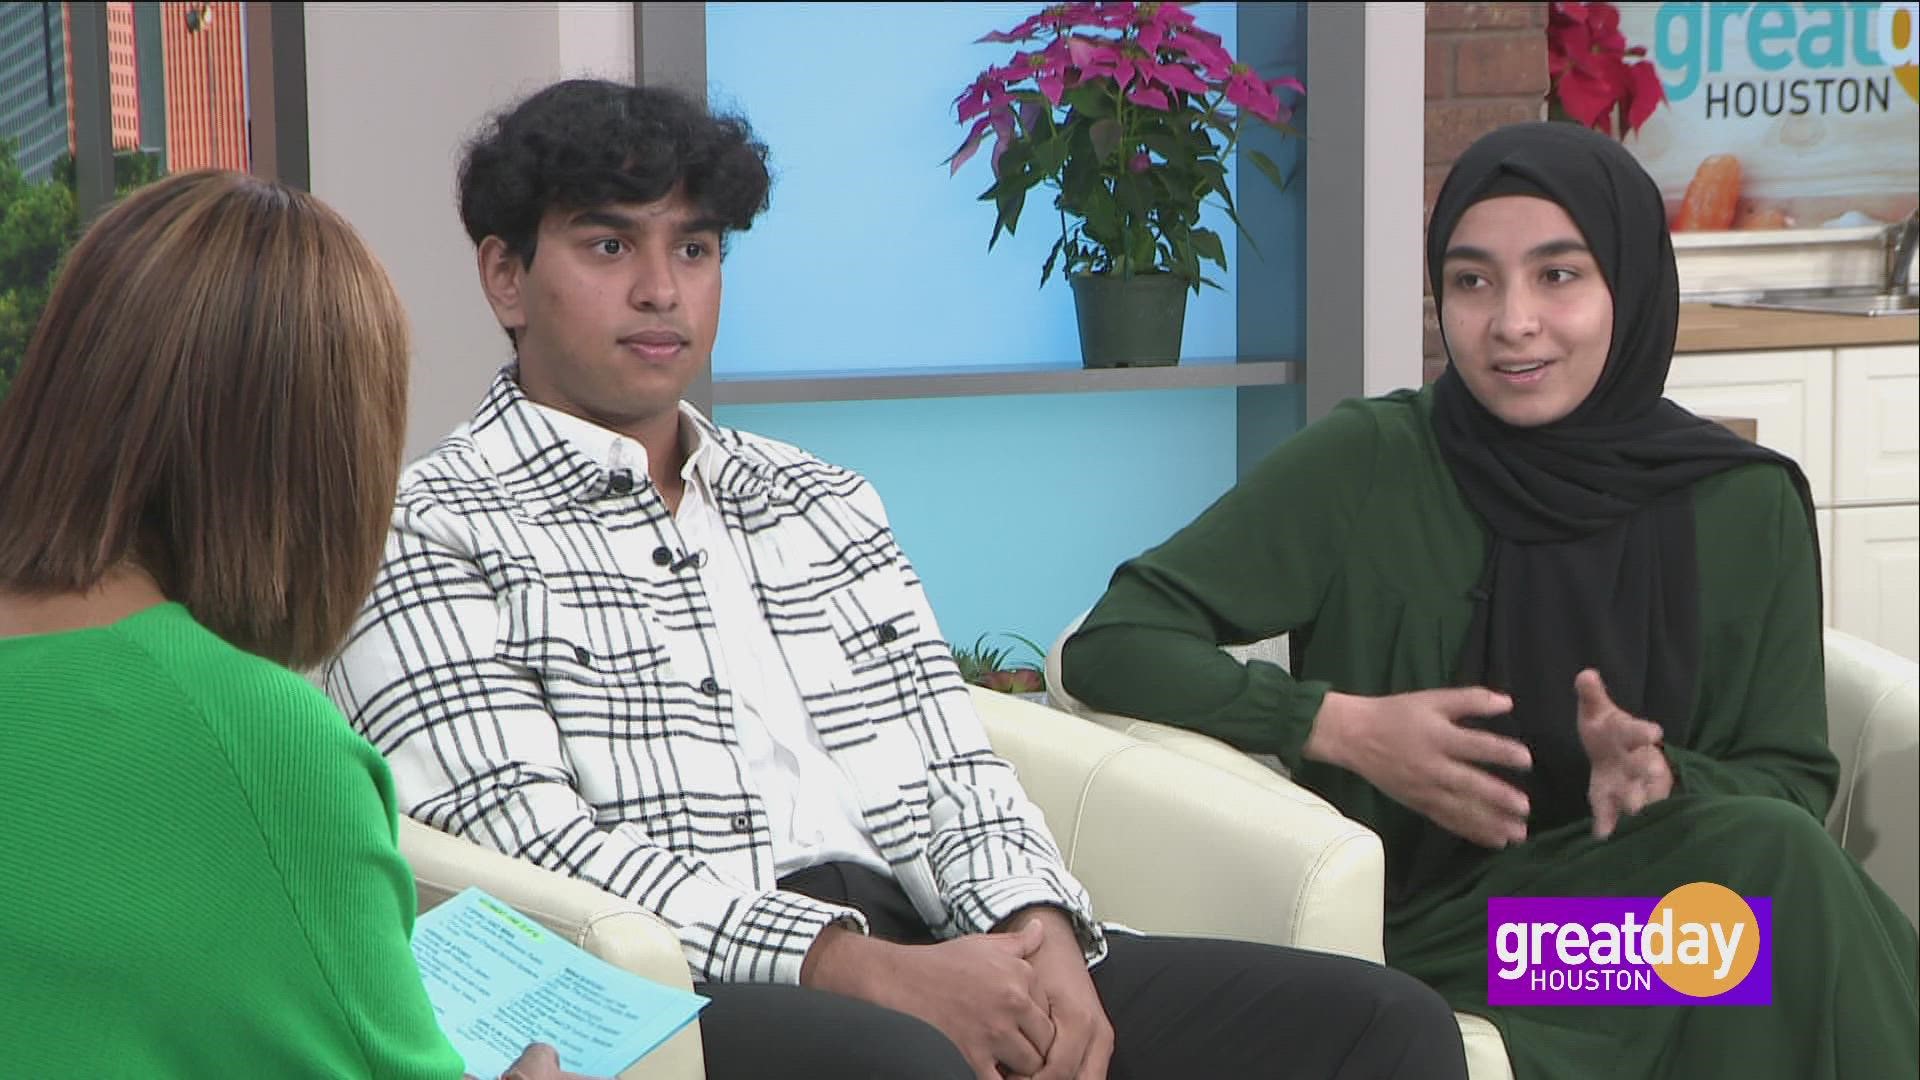 Students Vishnu Nair and Mina Azizi talk about their journey to America, what it means for their lives, and why they're thankful.